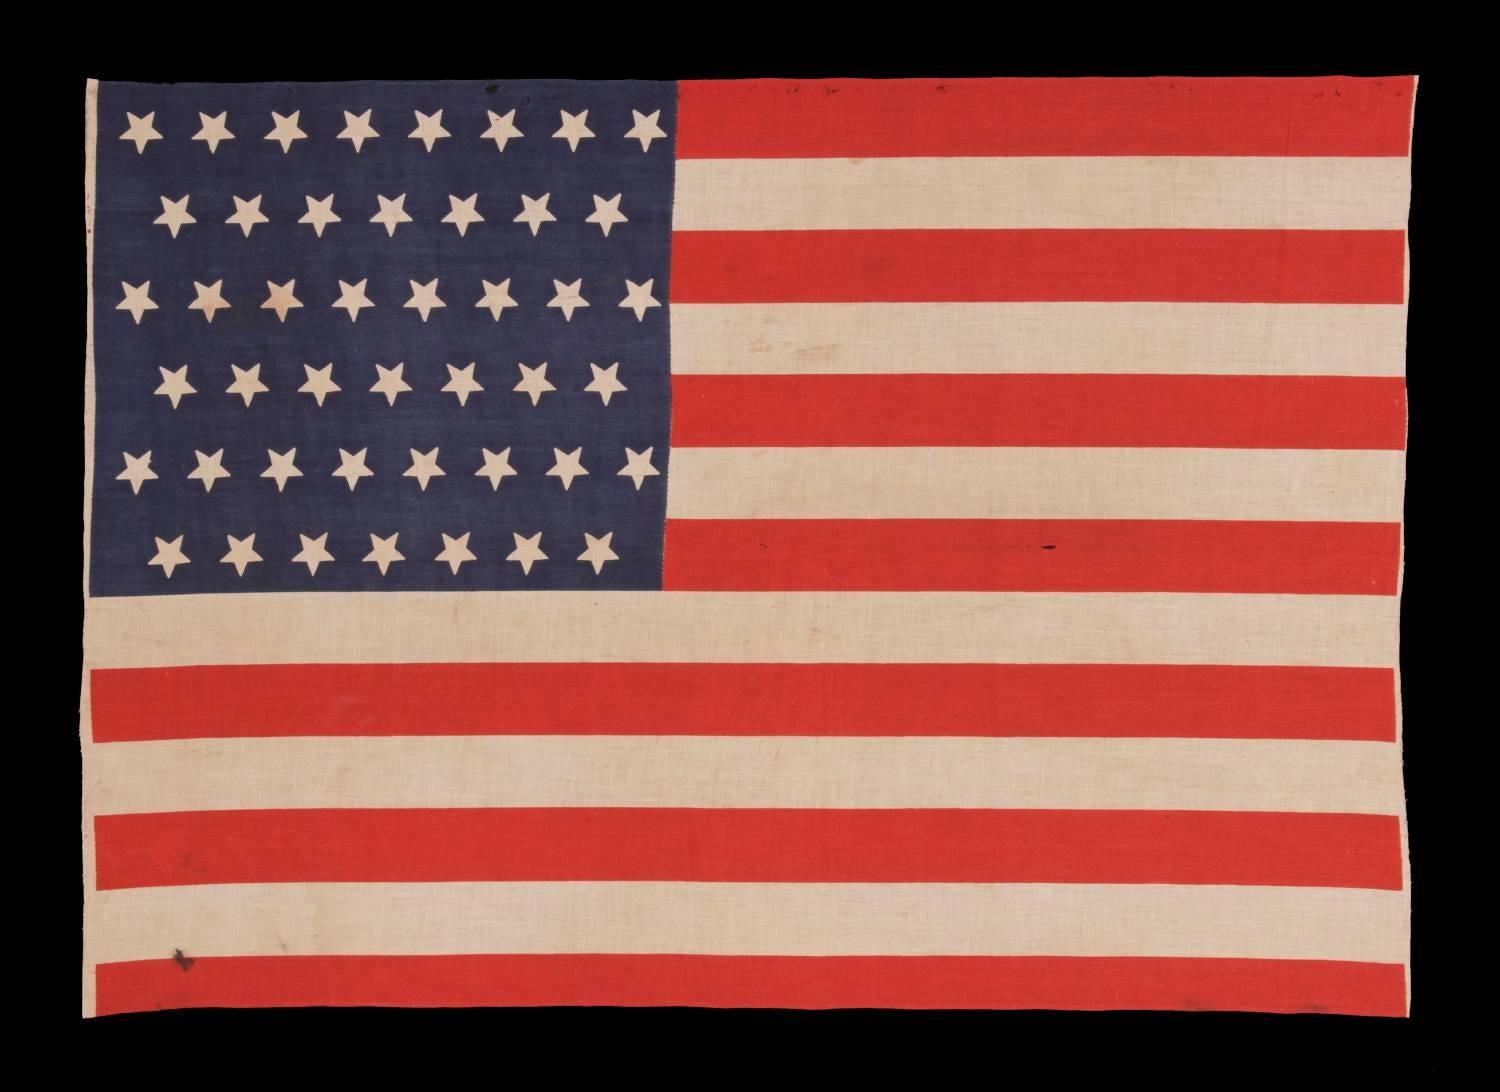 Antique American flag with 45 upside-down stars, 1896-1908, utah statehood, Spanish-American war era:

45 star American national parade flag, printed on plain weave cotton. Note how the stars, which are arranged in staggered rows, are upside-down